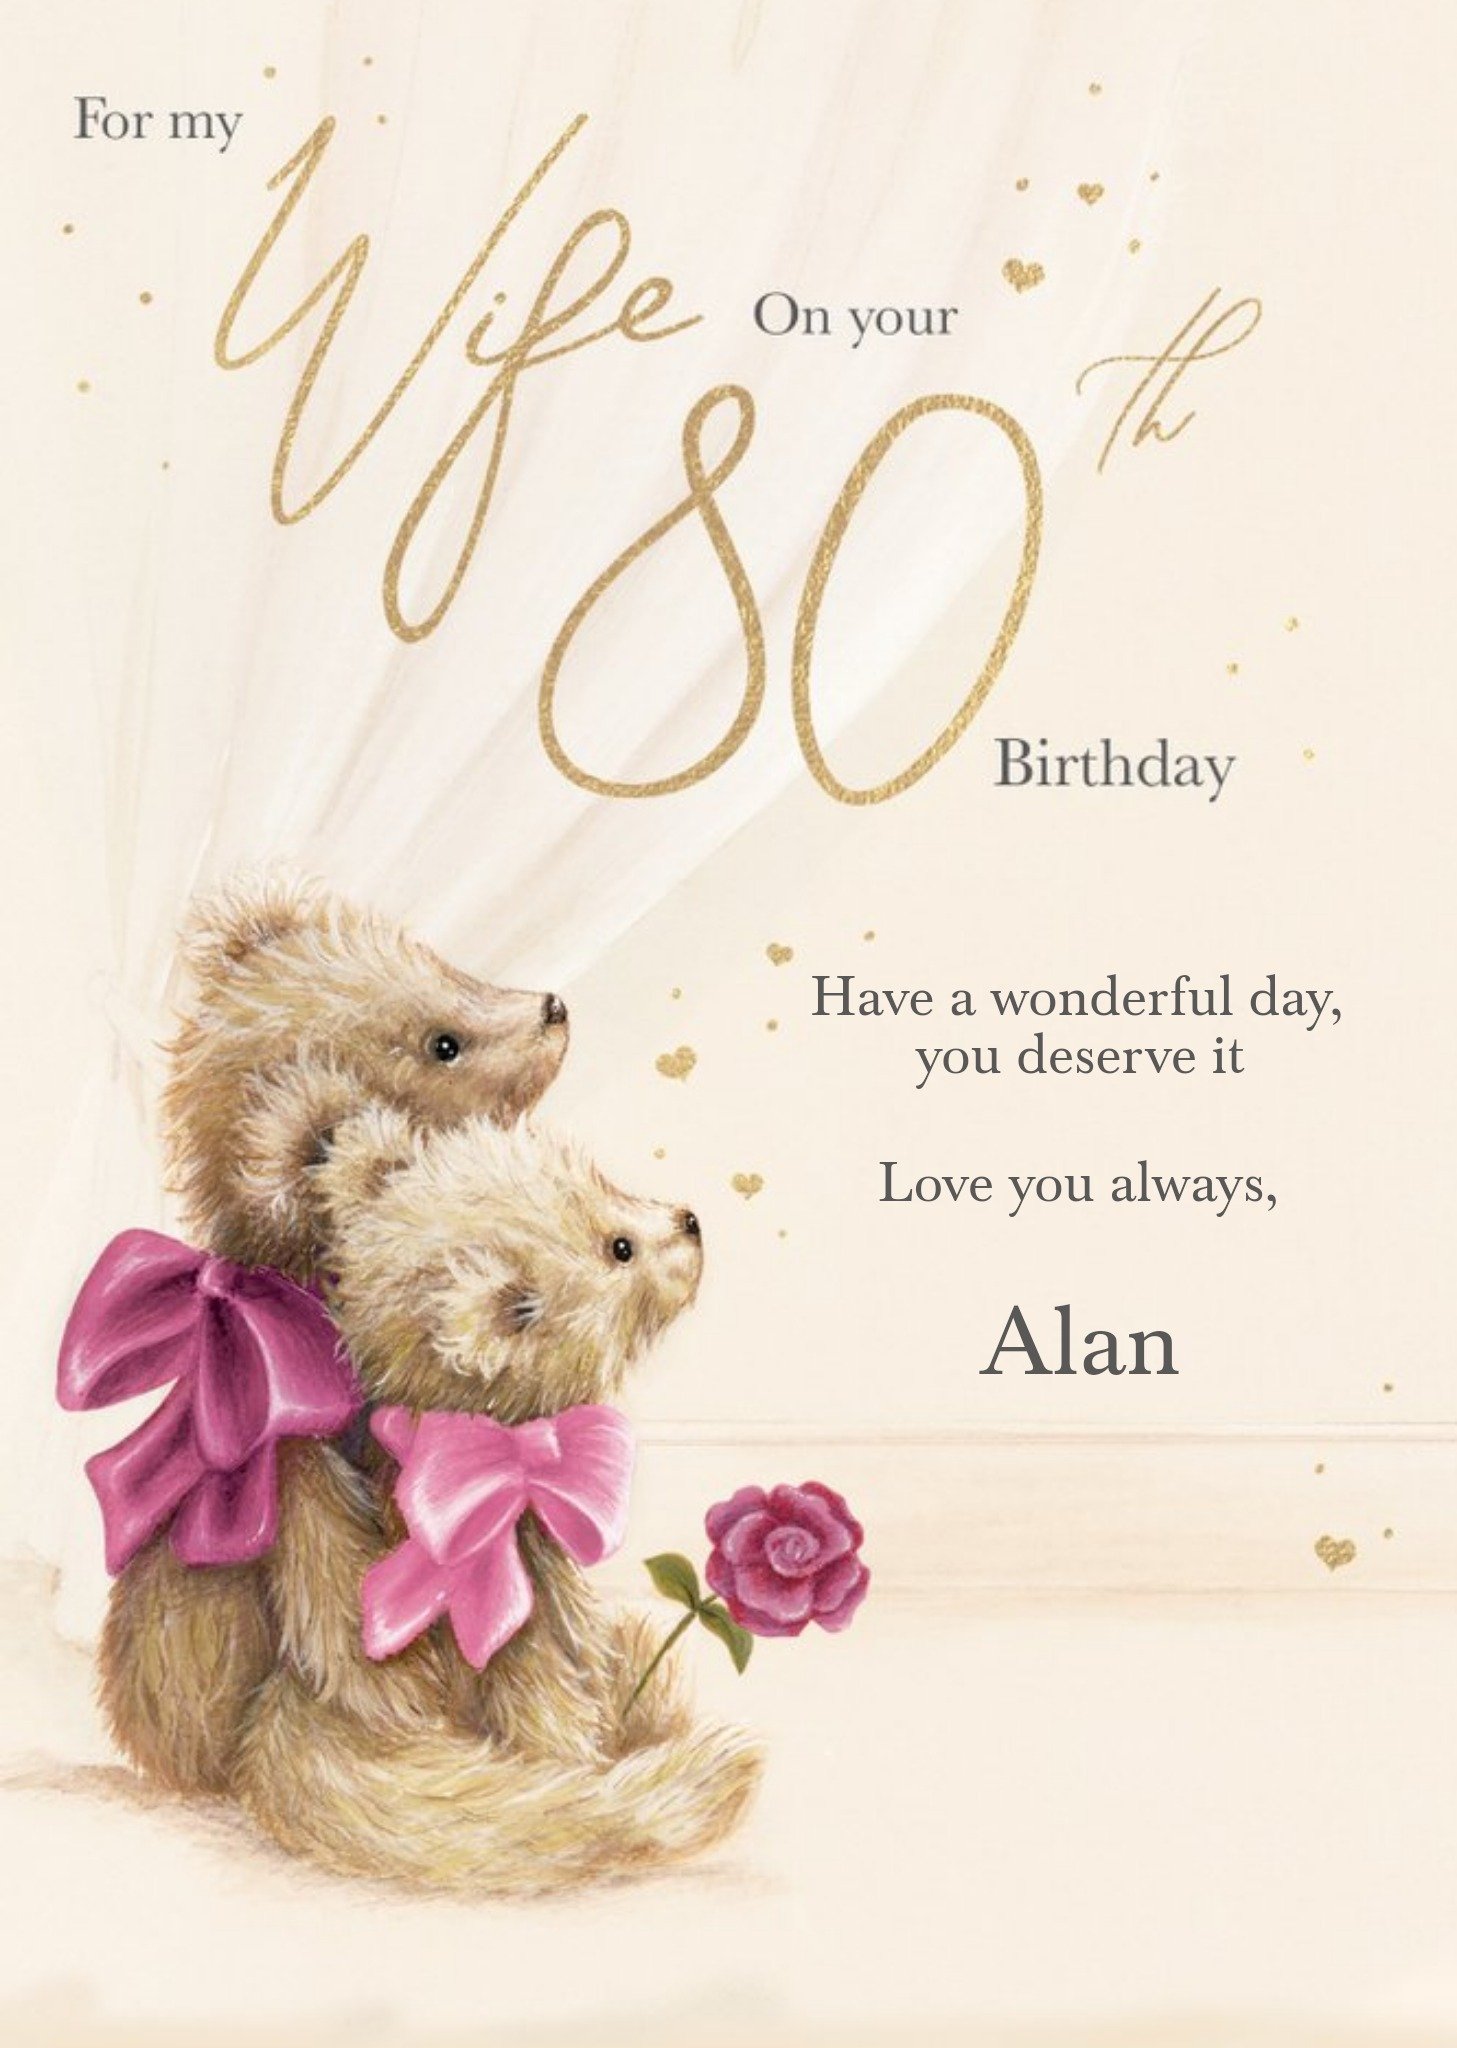 Love Hearts Clintons 80th Milestone For Her Wife Cute Teddy Bears Pink Birthday Card, Large